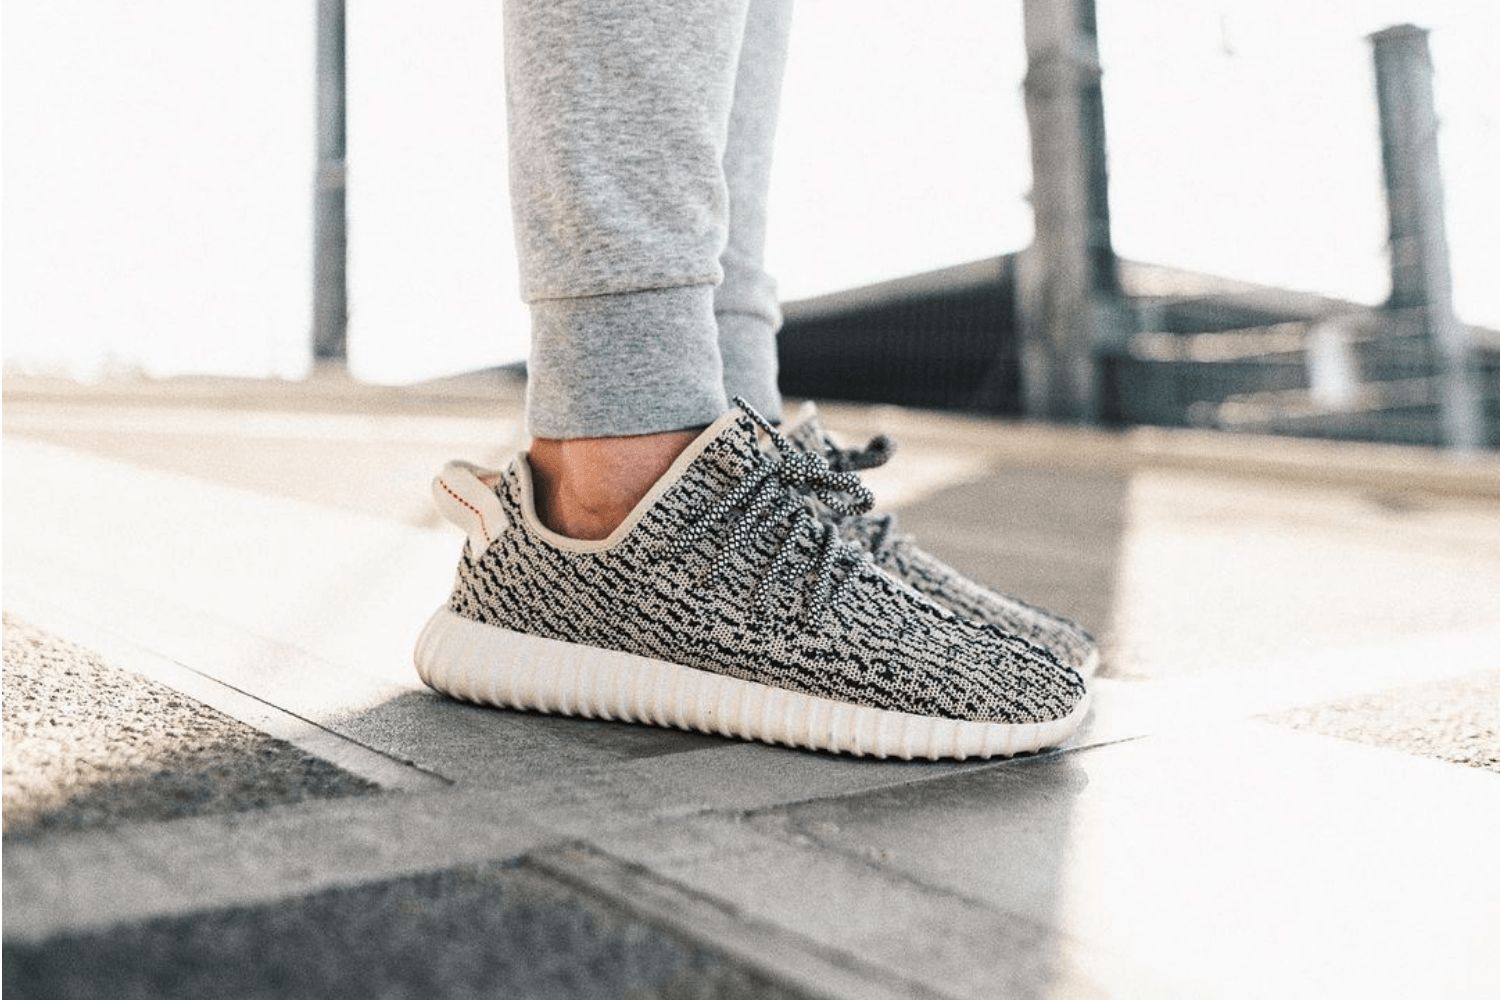 The Yeezy Boost 350 'Turtle Dove' makes its comeback